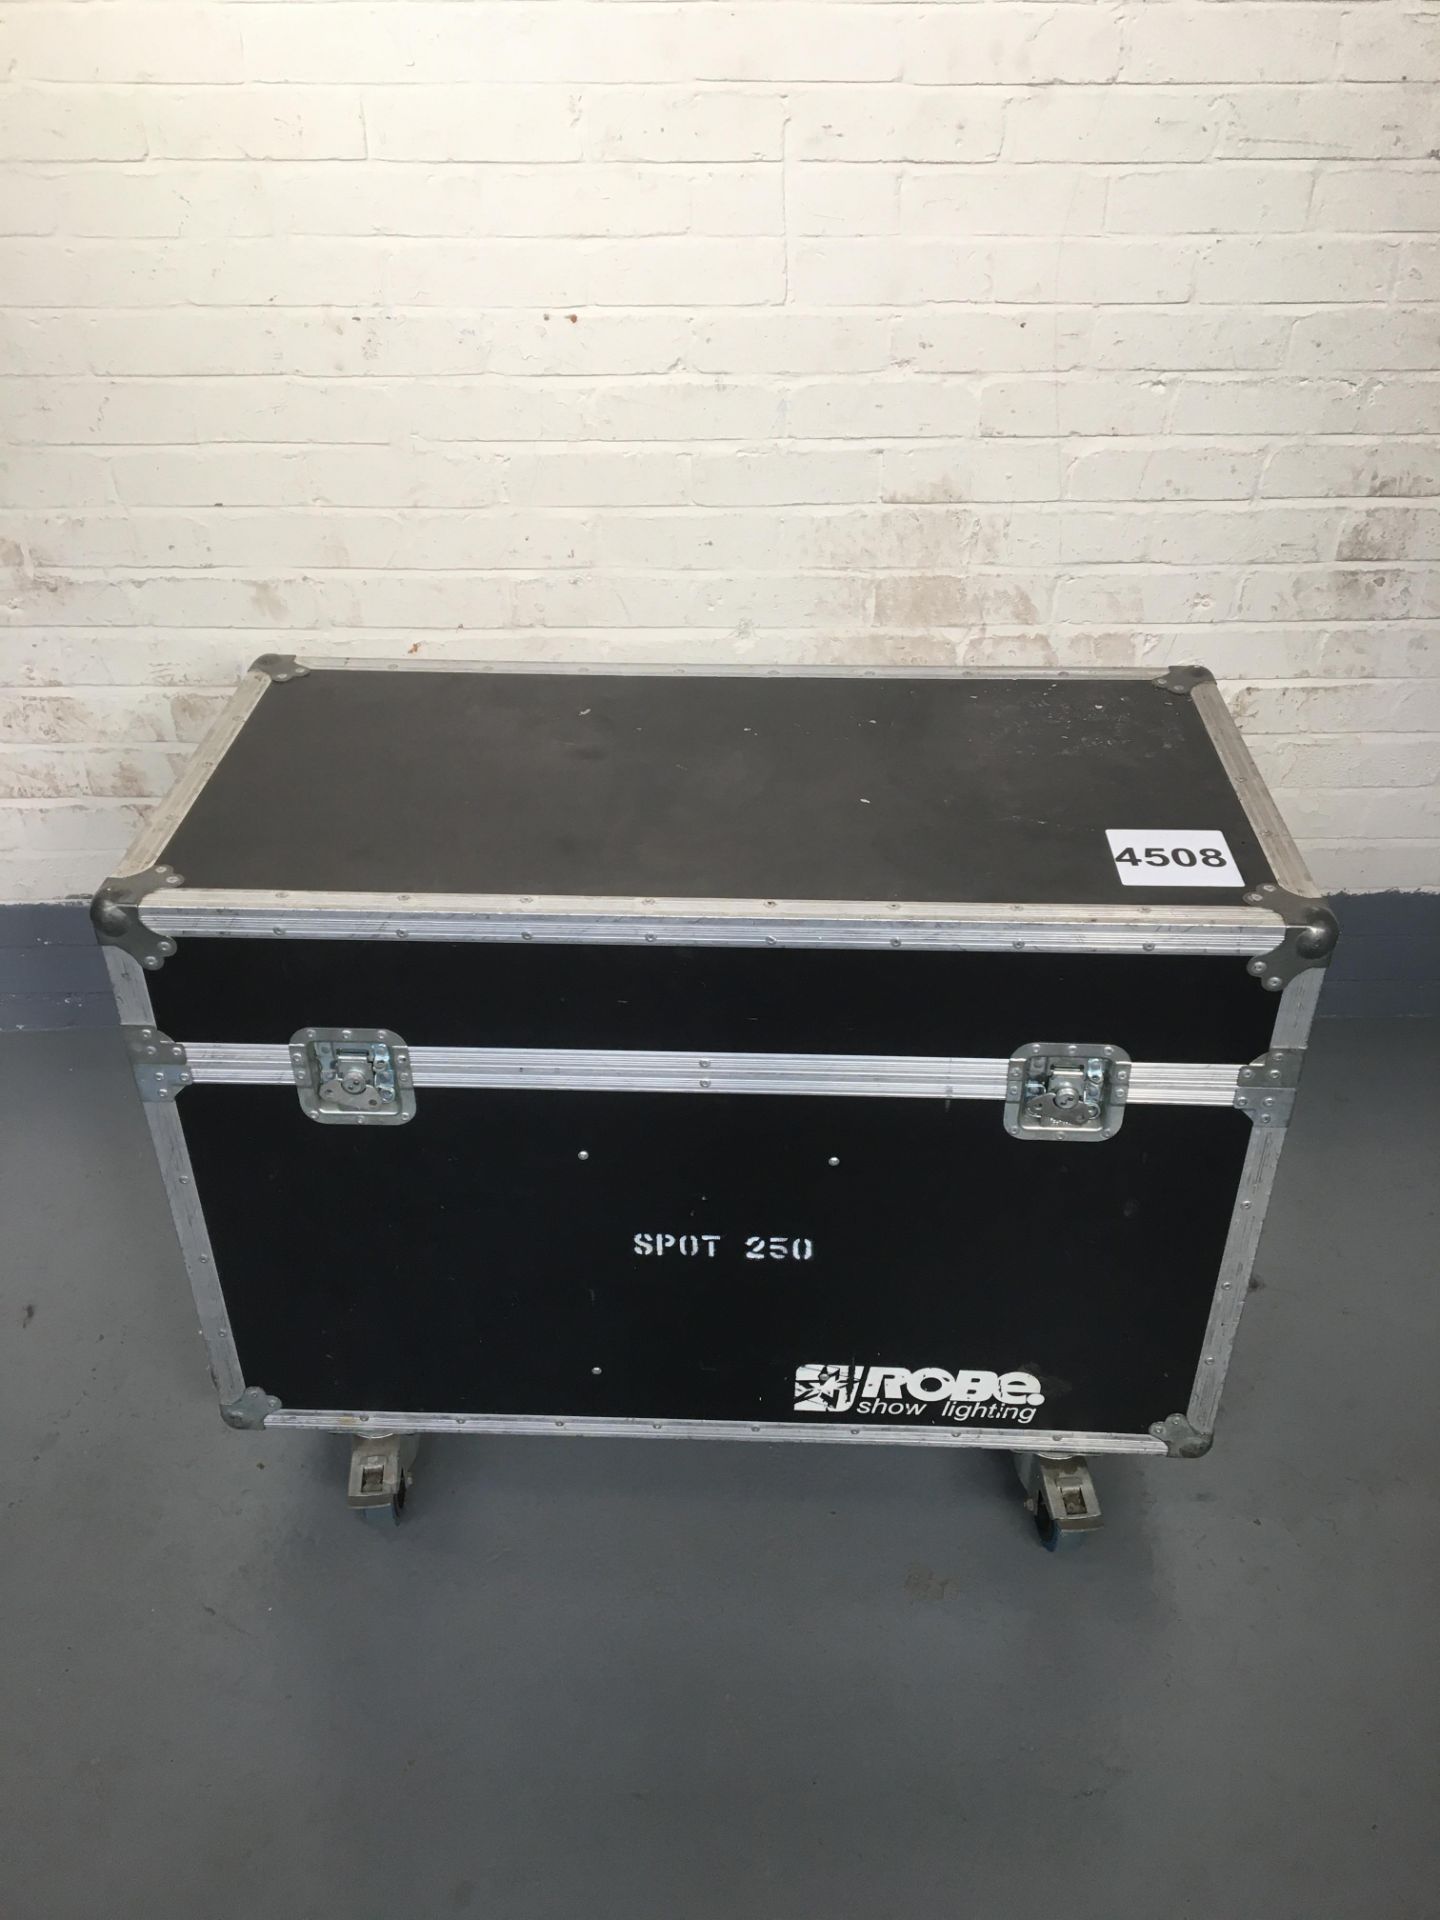 Flight case for 2x Robe 250 spot Moving Light. 495*1000*635mm. Condition: Used Ex Hire